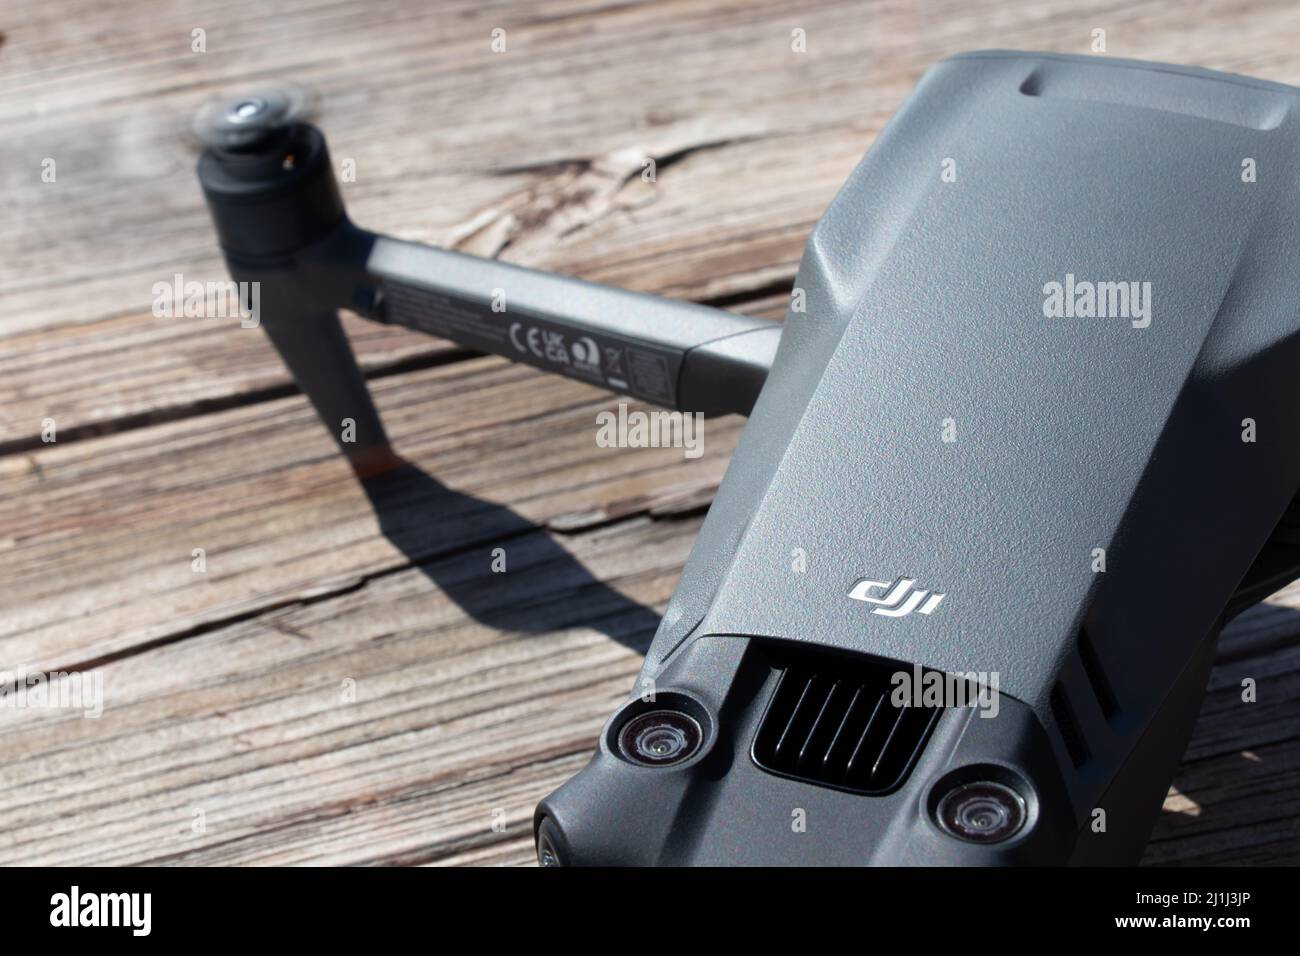 The DJI logo, a Chinese technology company and popular drone manufacturer is seen on the top of the new DJI Mavic 3 consumer drone. Stock Photo